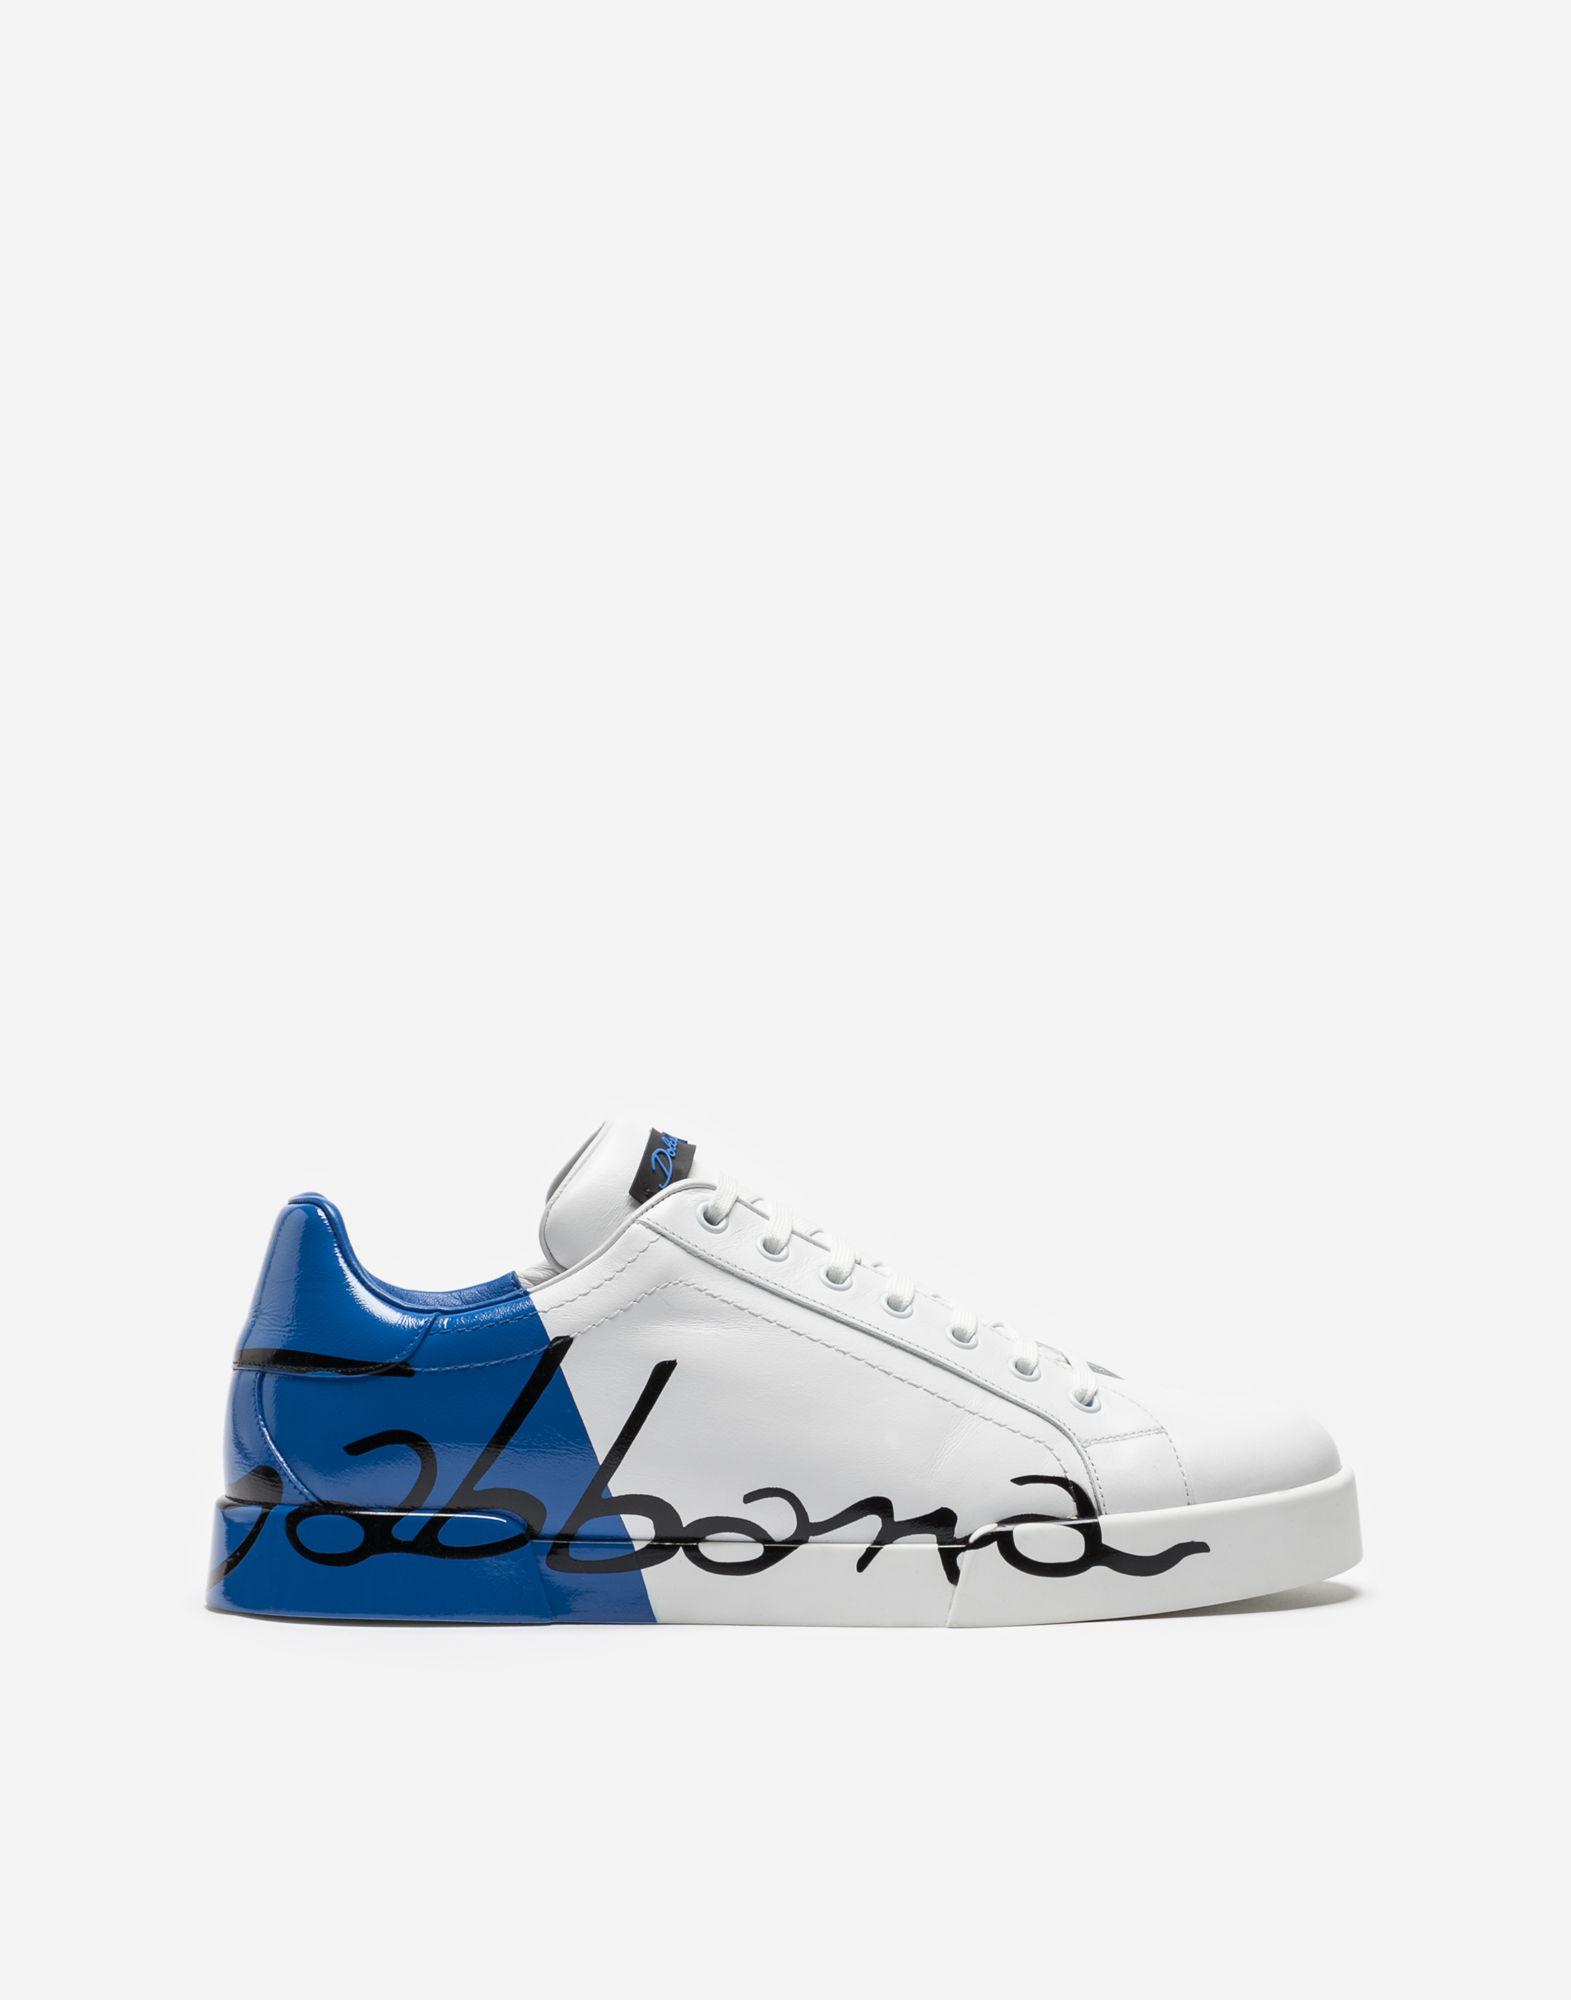 Lyst - Dolce & Gabbana Portofino Sneakers In Leather And Patent in Blue ...